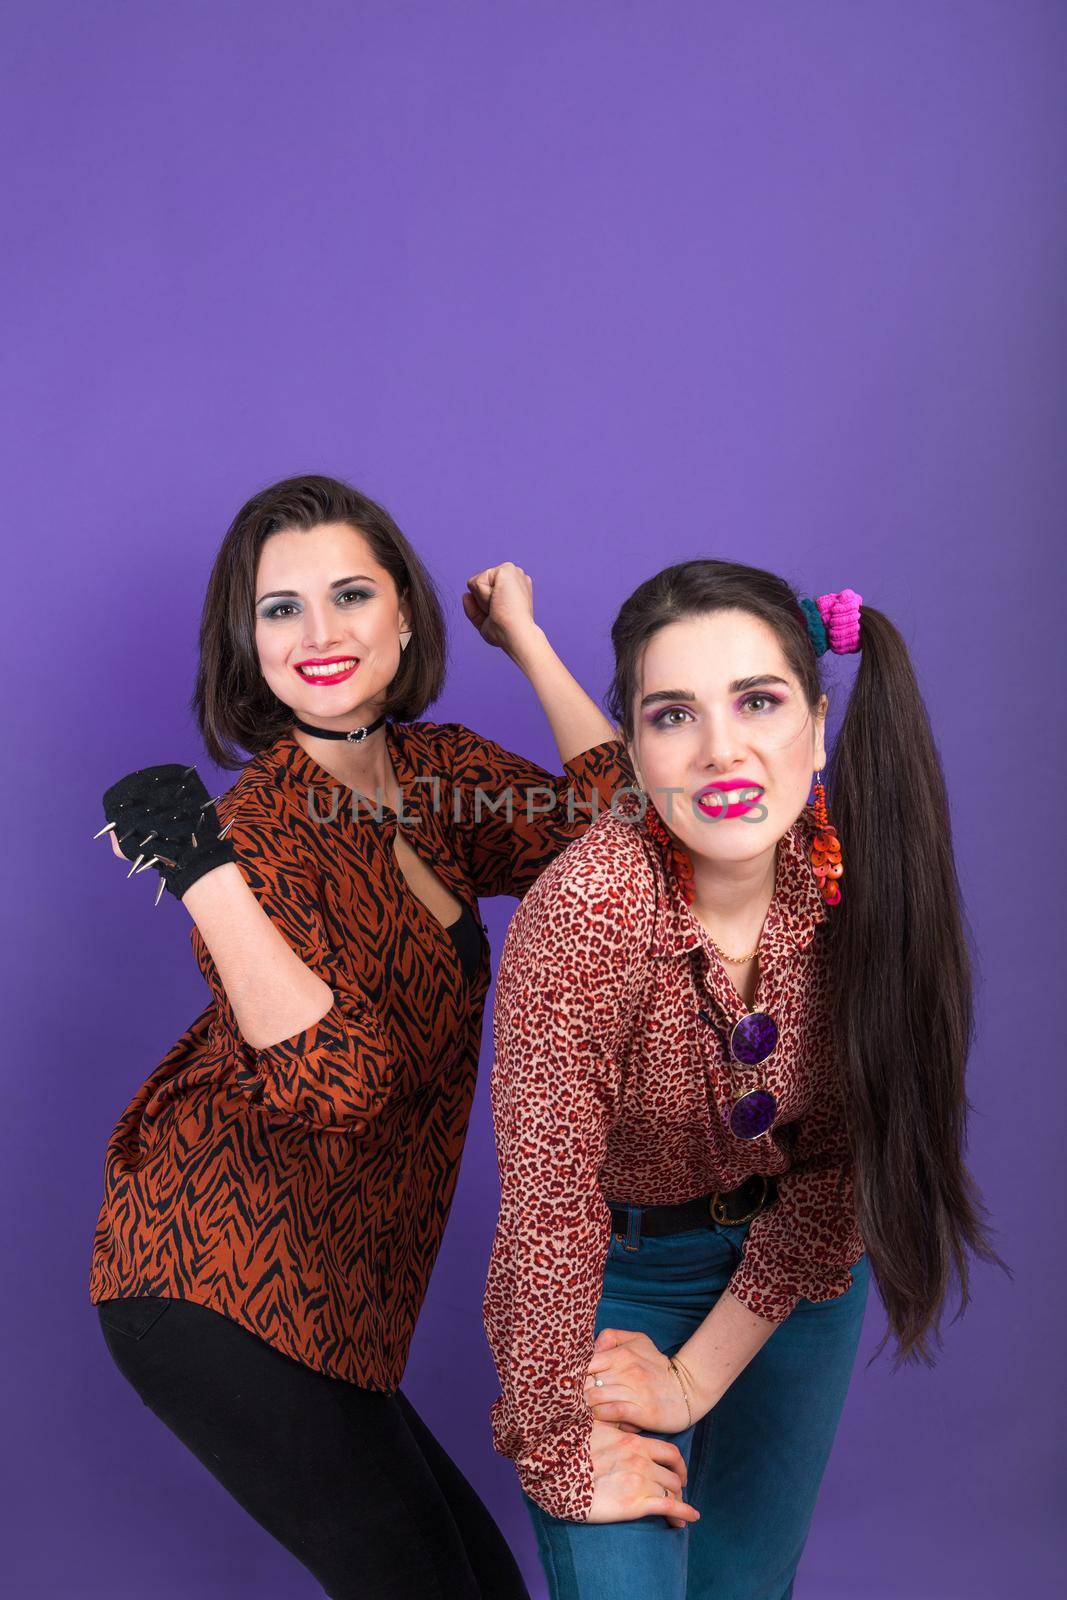 Party in retro 90s and 80s style. Two young women on violet background with copy space.